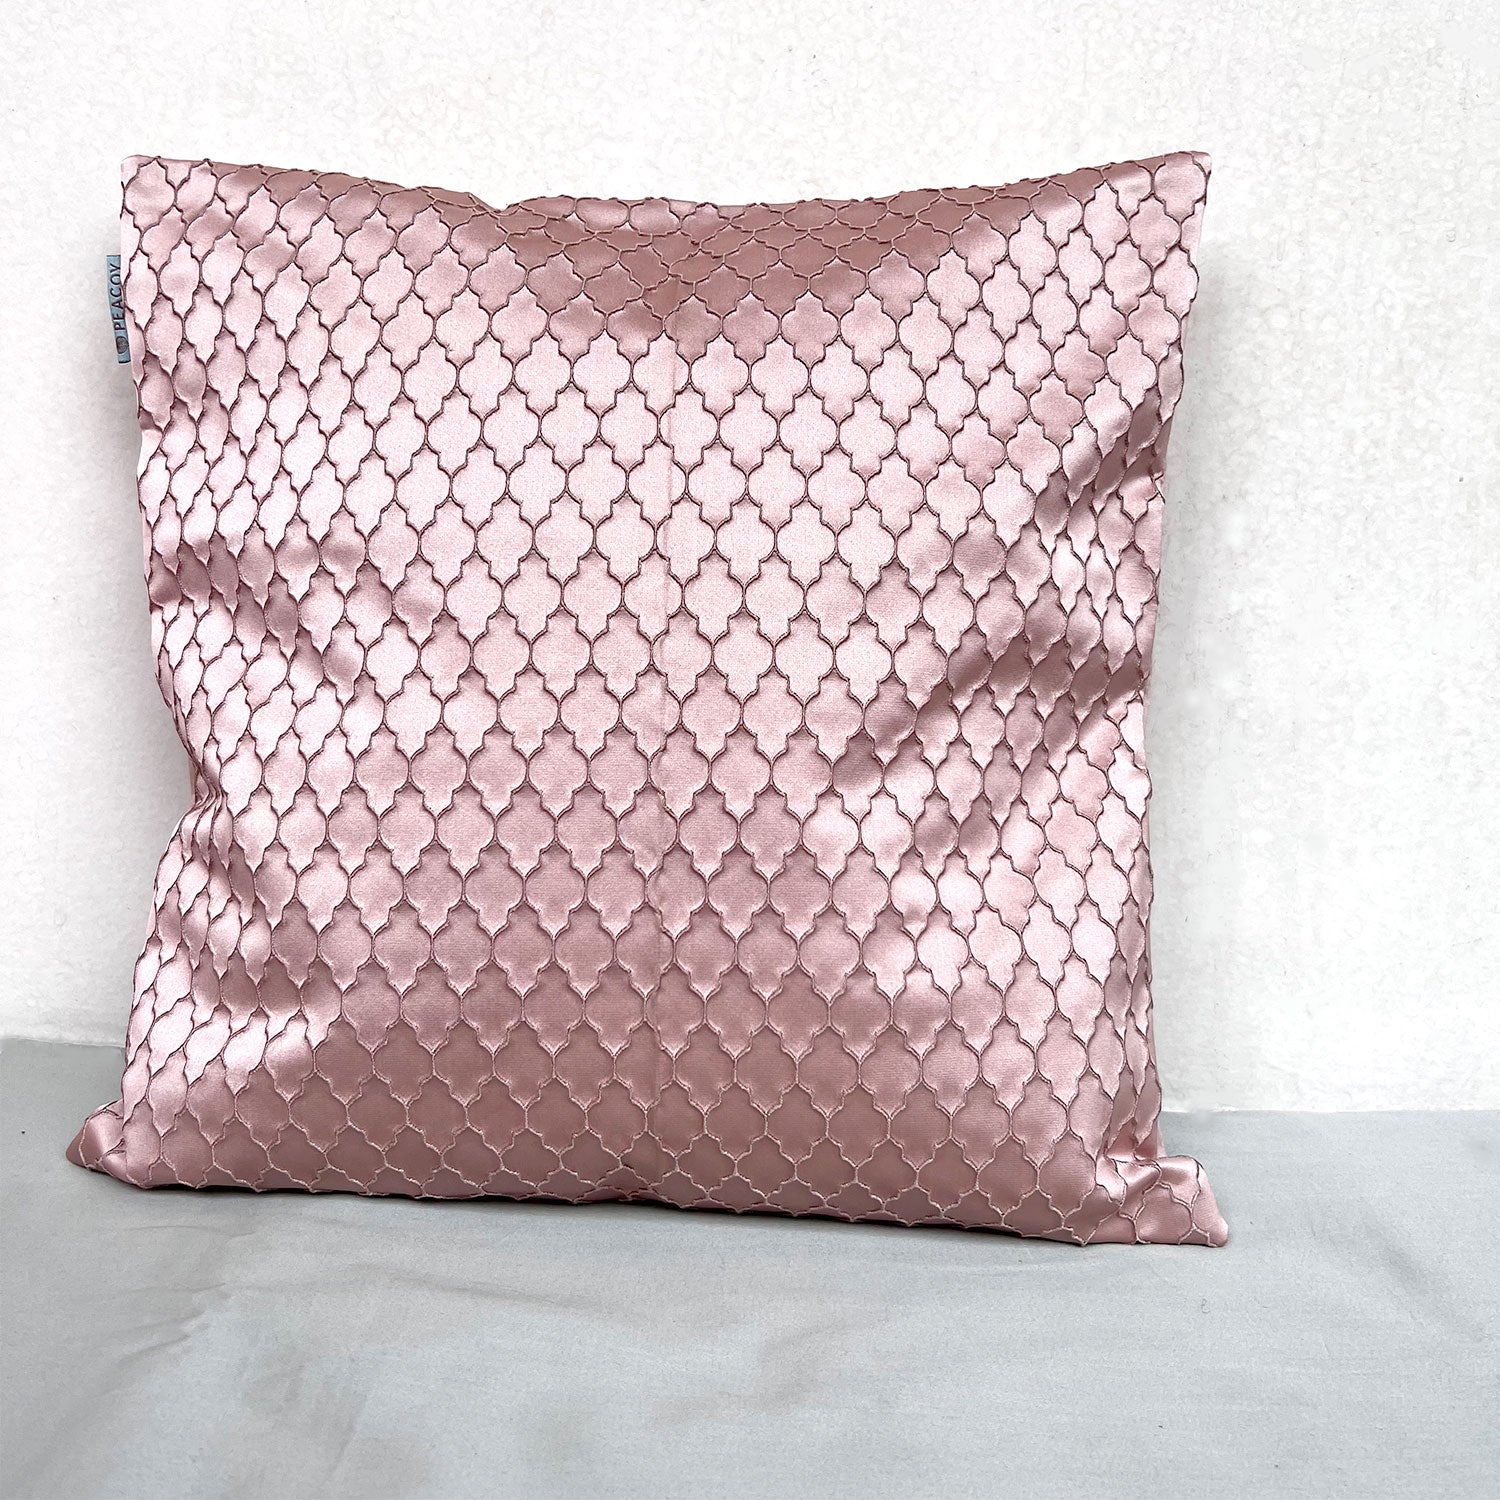 Light Beige Golden Cushion Cover - 16 x 16 inches | Heavy Silk Polyester with Pure Casement Cotton Back Side